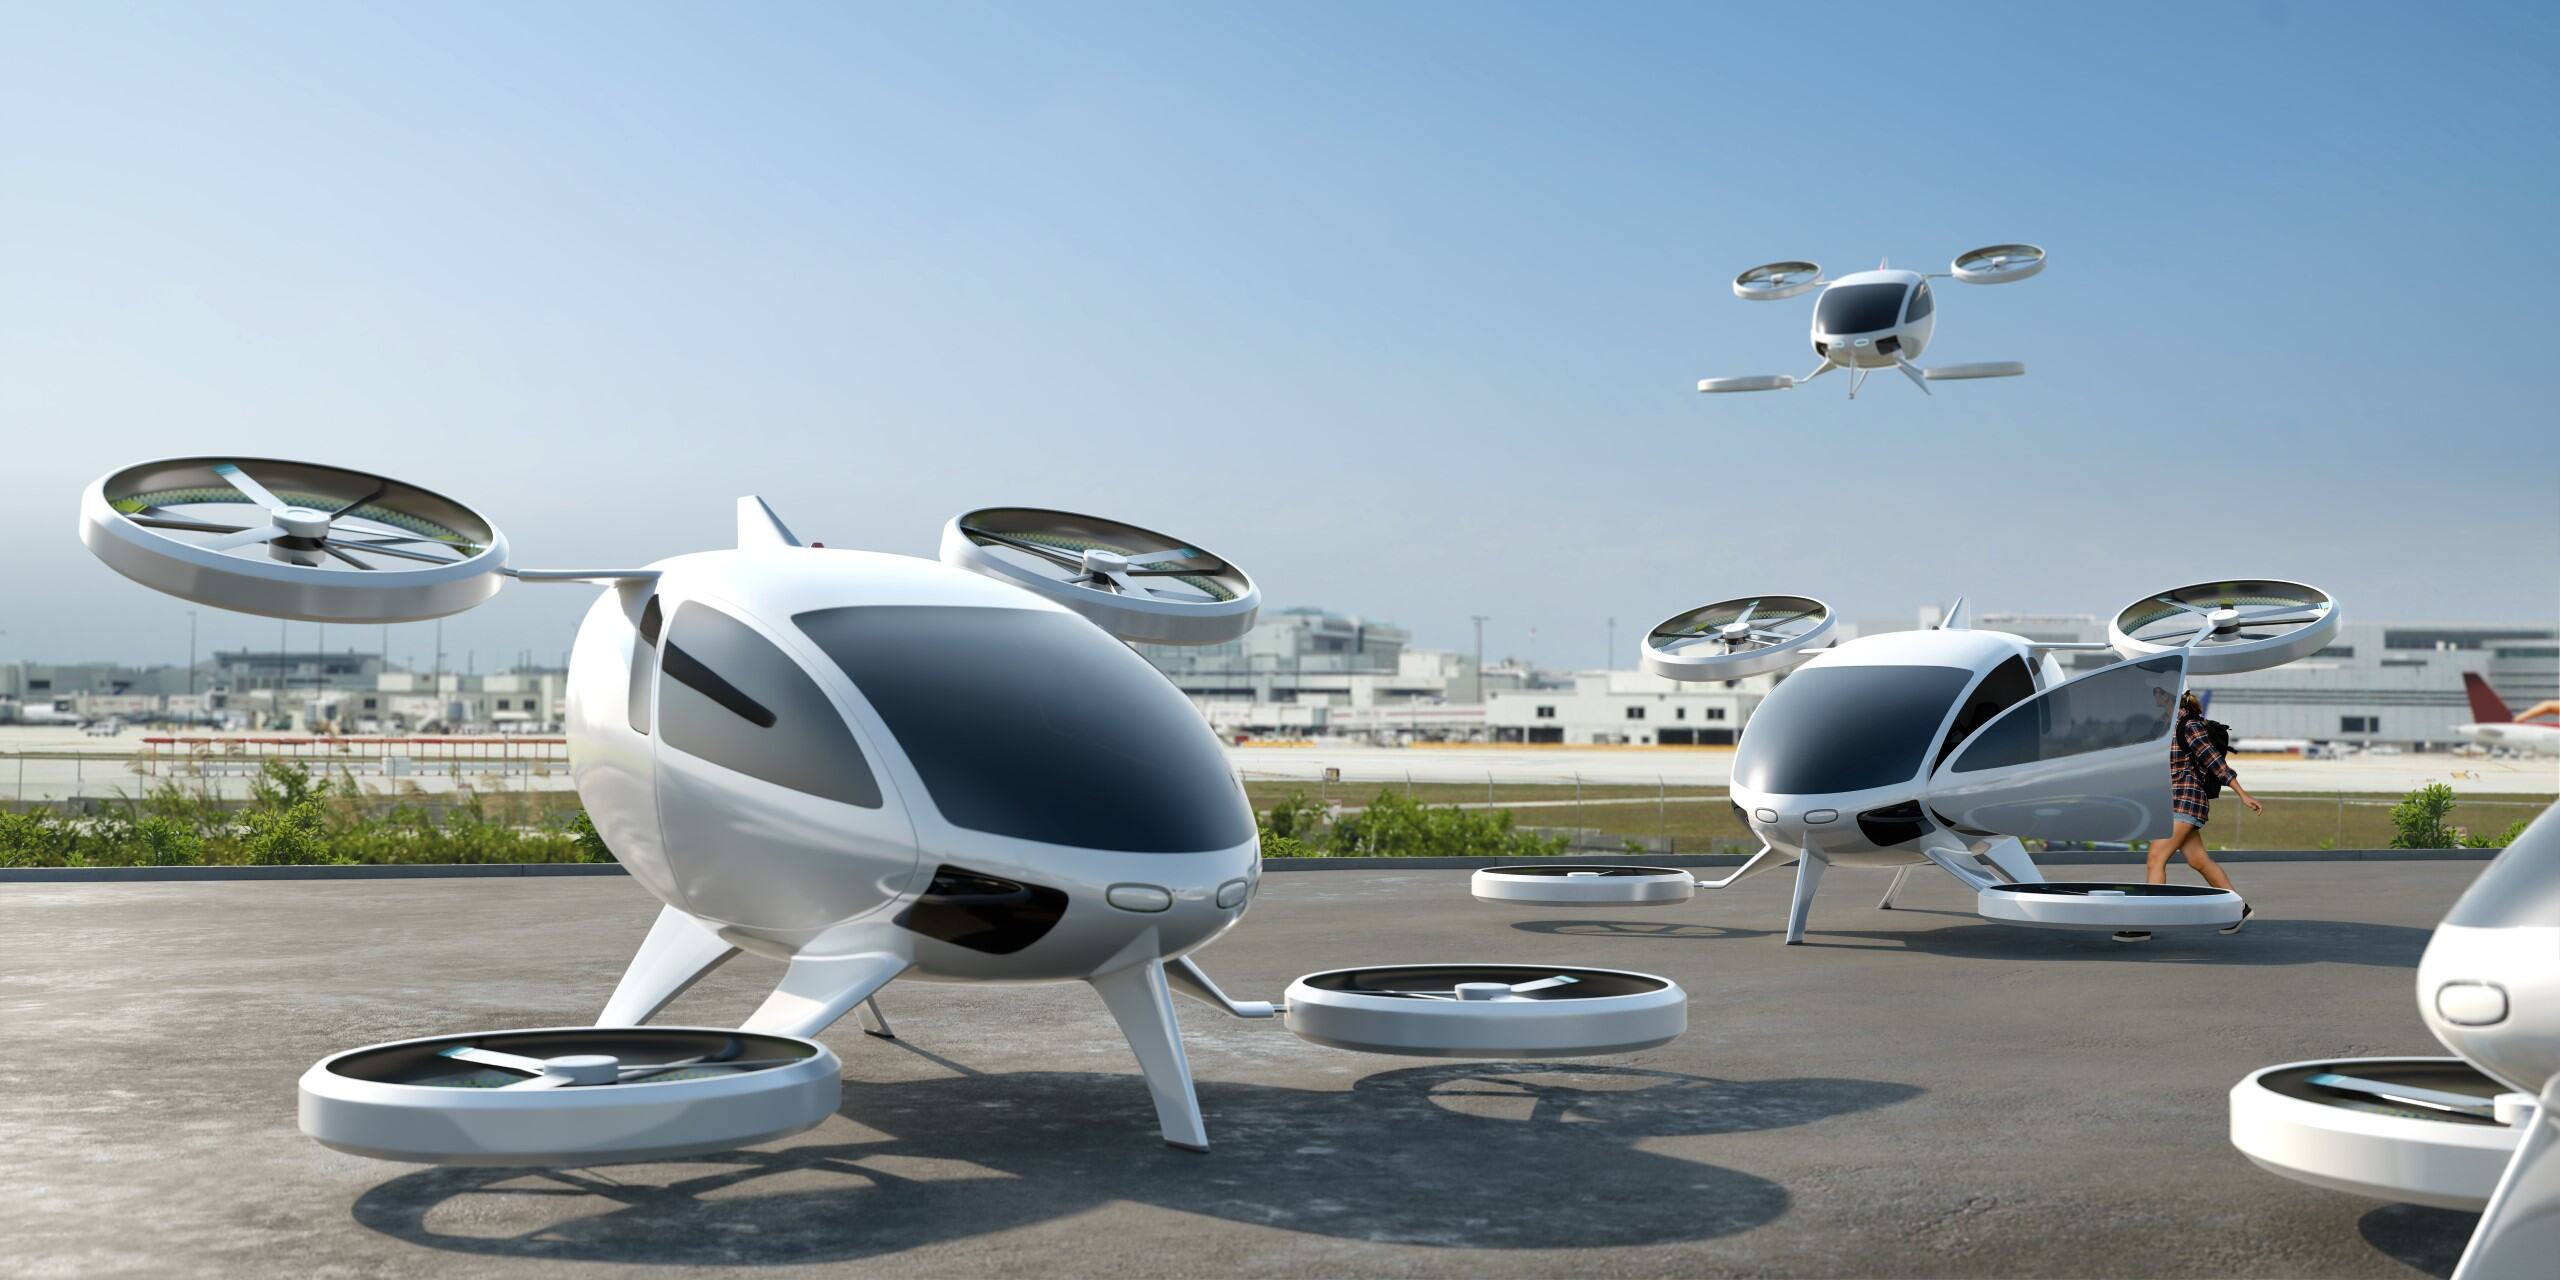 A concept image of three advanced air mobility vehicles landed at an airport, and another flying in the air.